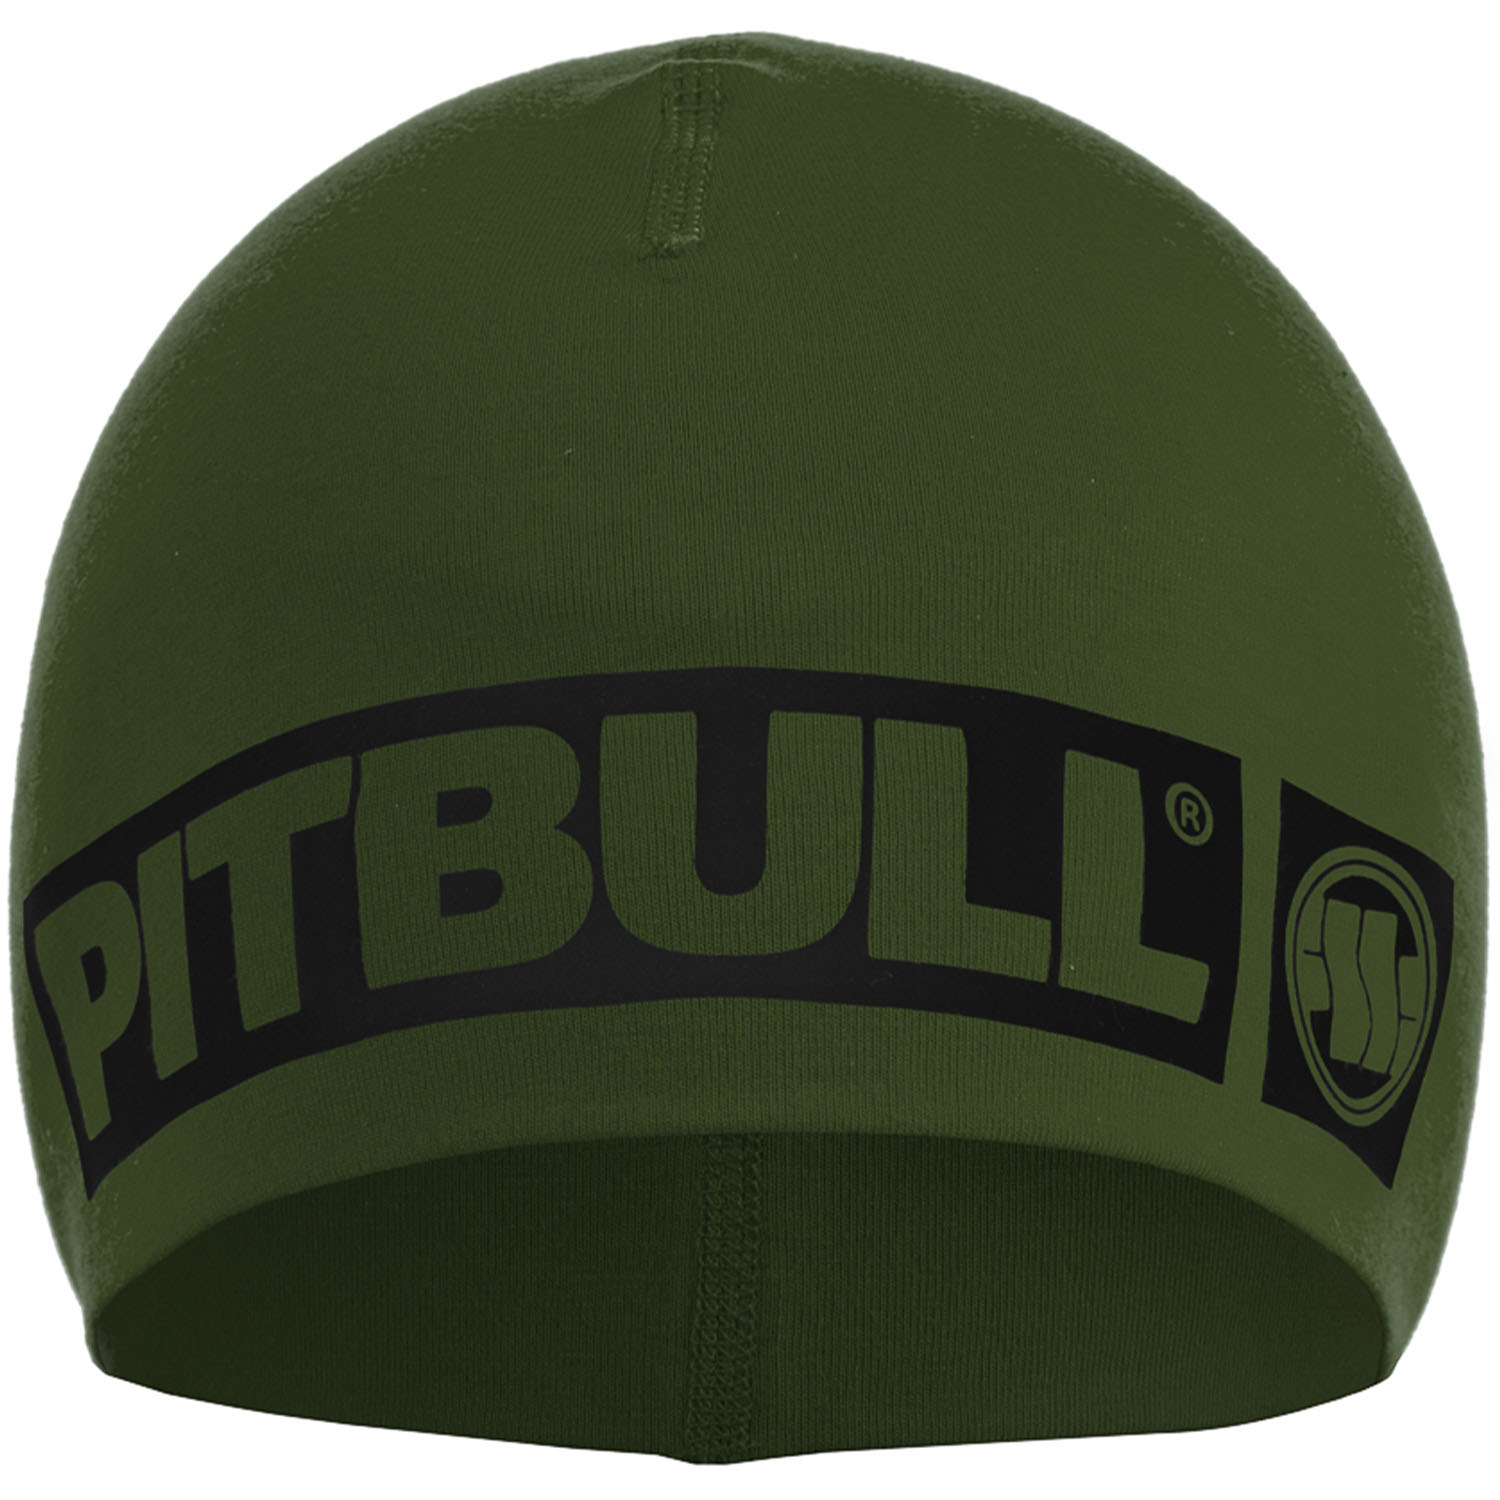 Pit Bull West Coast Beanie, Hilltop, olive